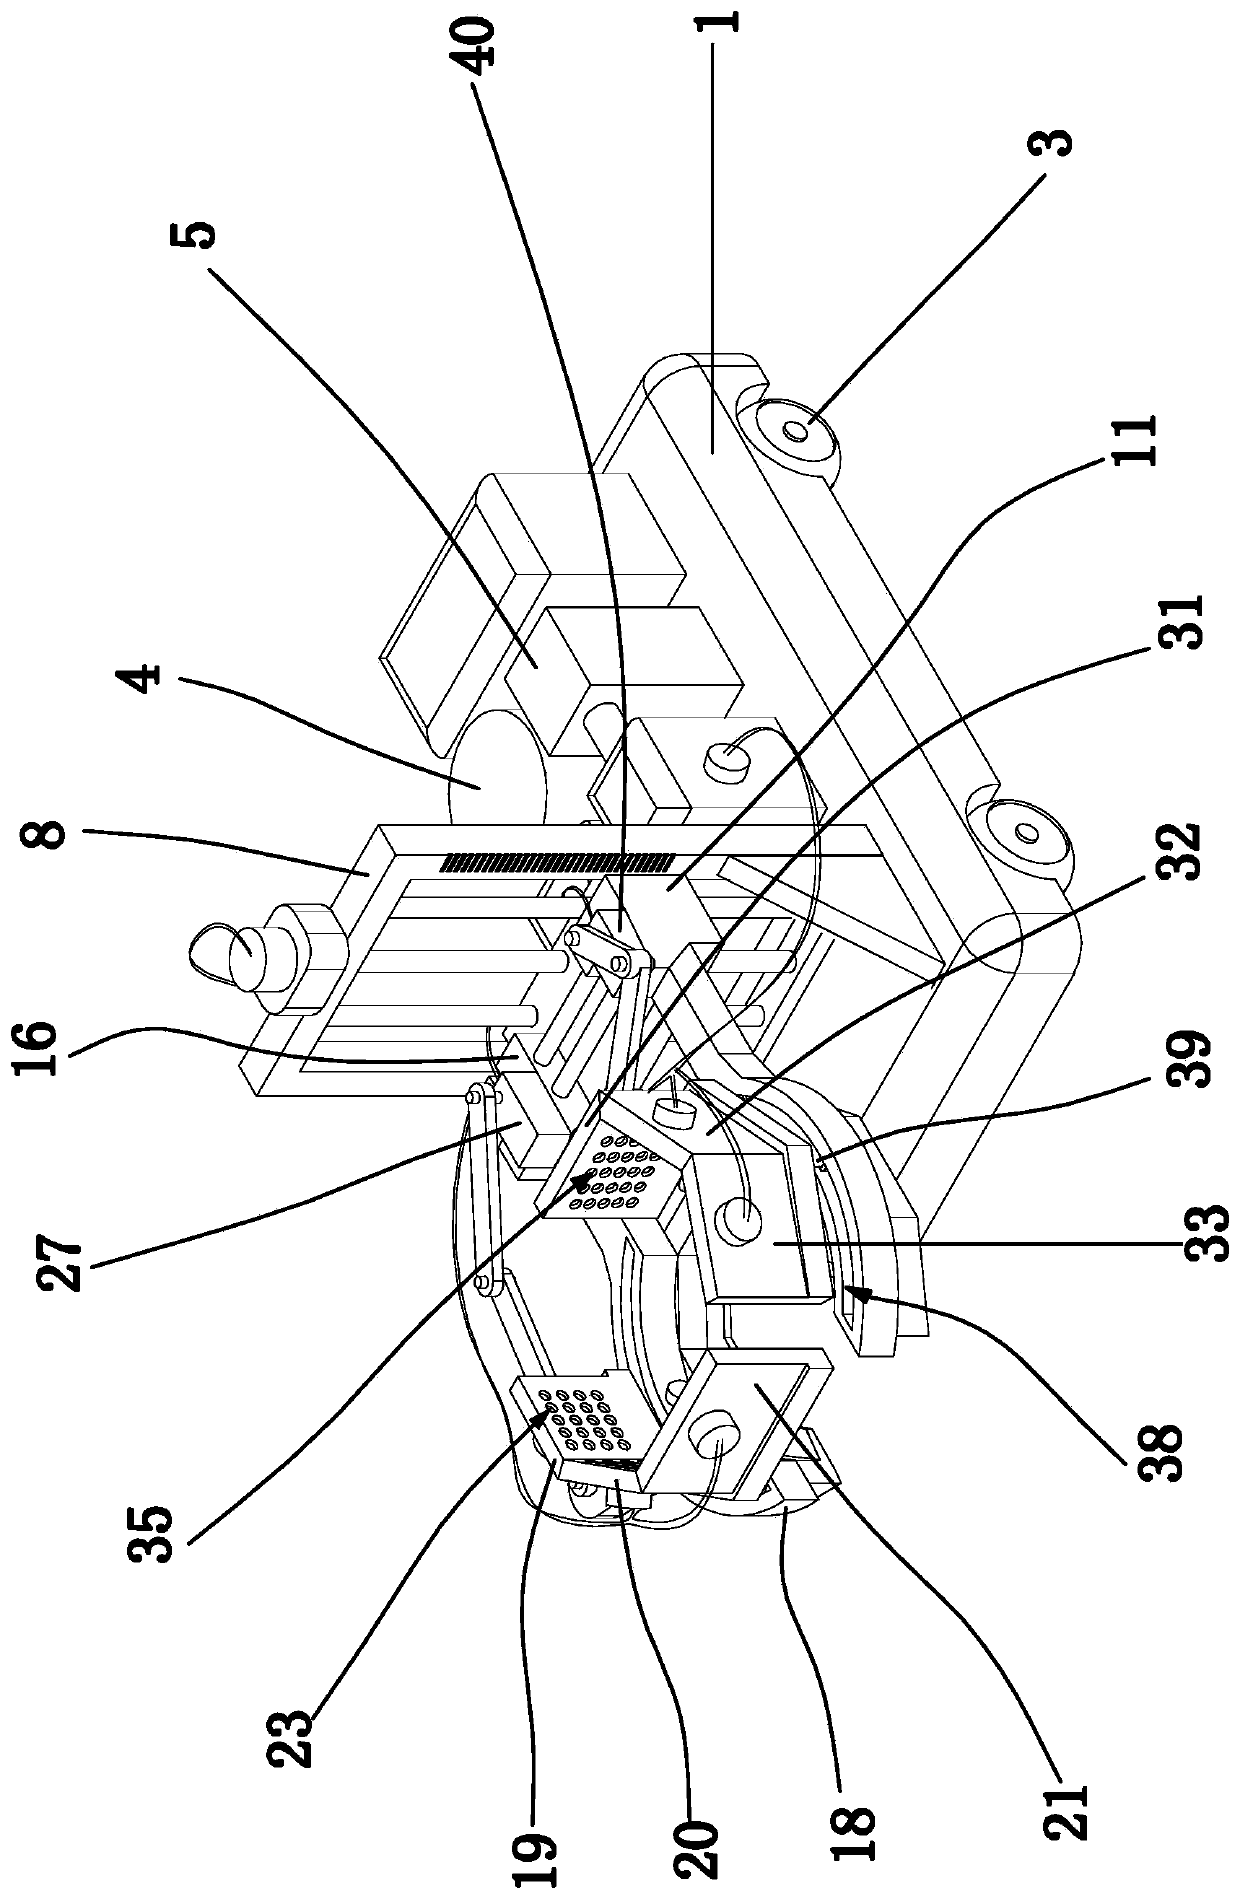 Vertical multi-nozzle tree trunk whitewashing assisting device